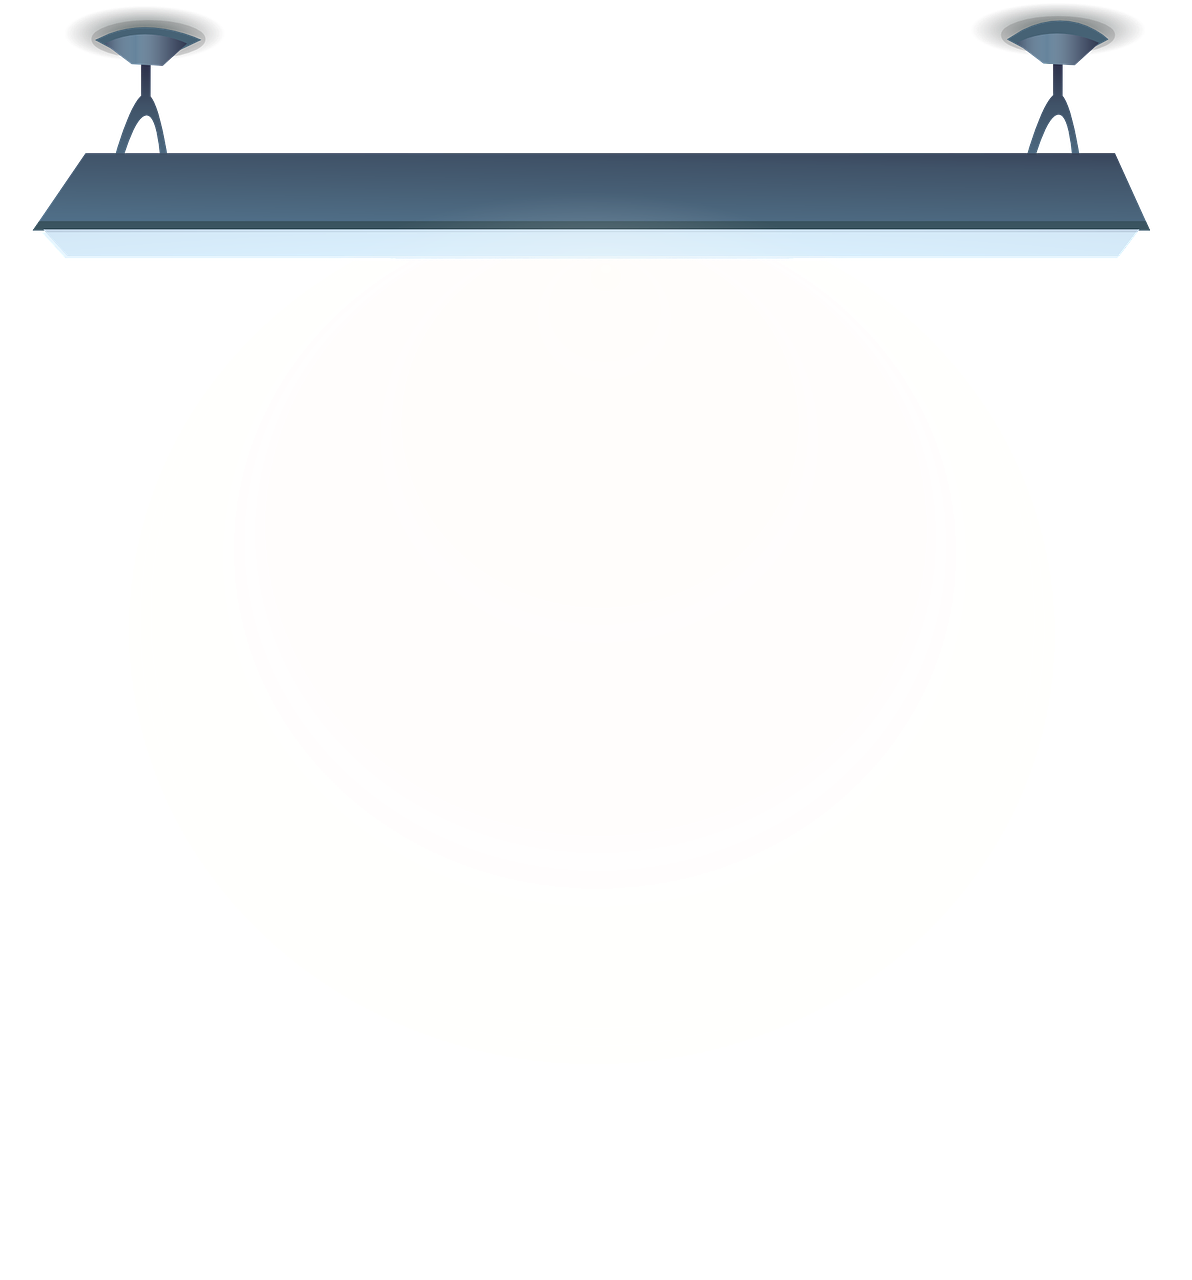 a white toilet sitting on top of a black floor, an illustration of, by Taiyō Matsumoto, tumblr, bauhaus, stage light, translucent sphere, flat color, show from below